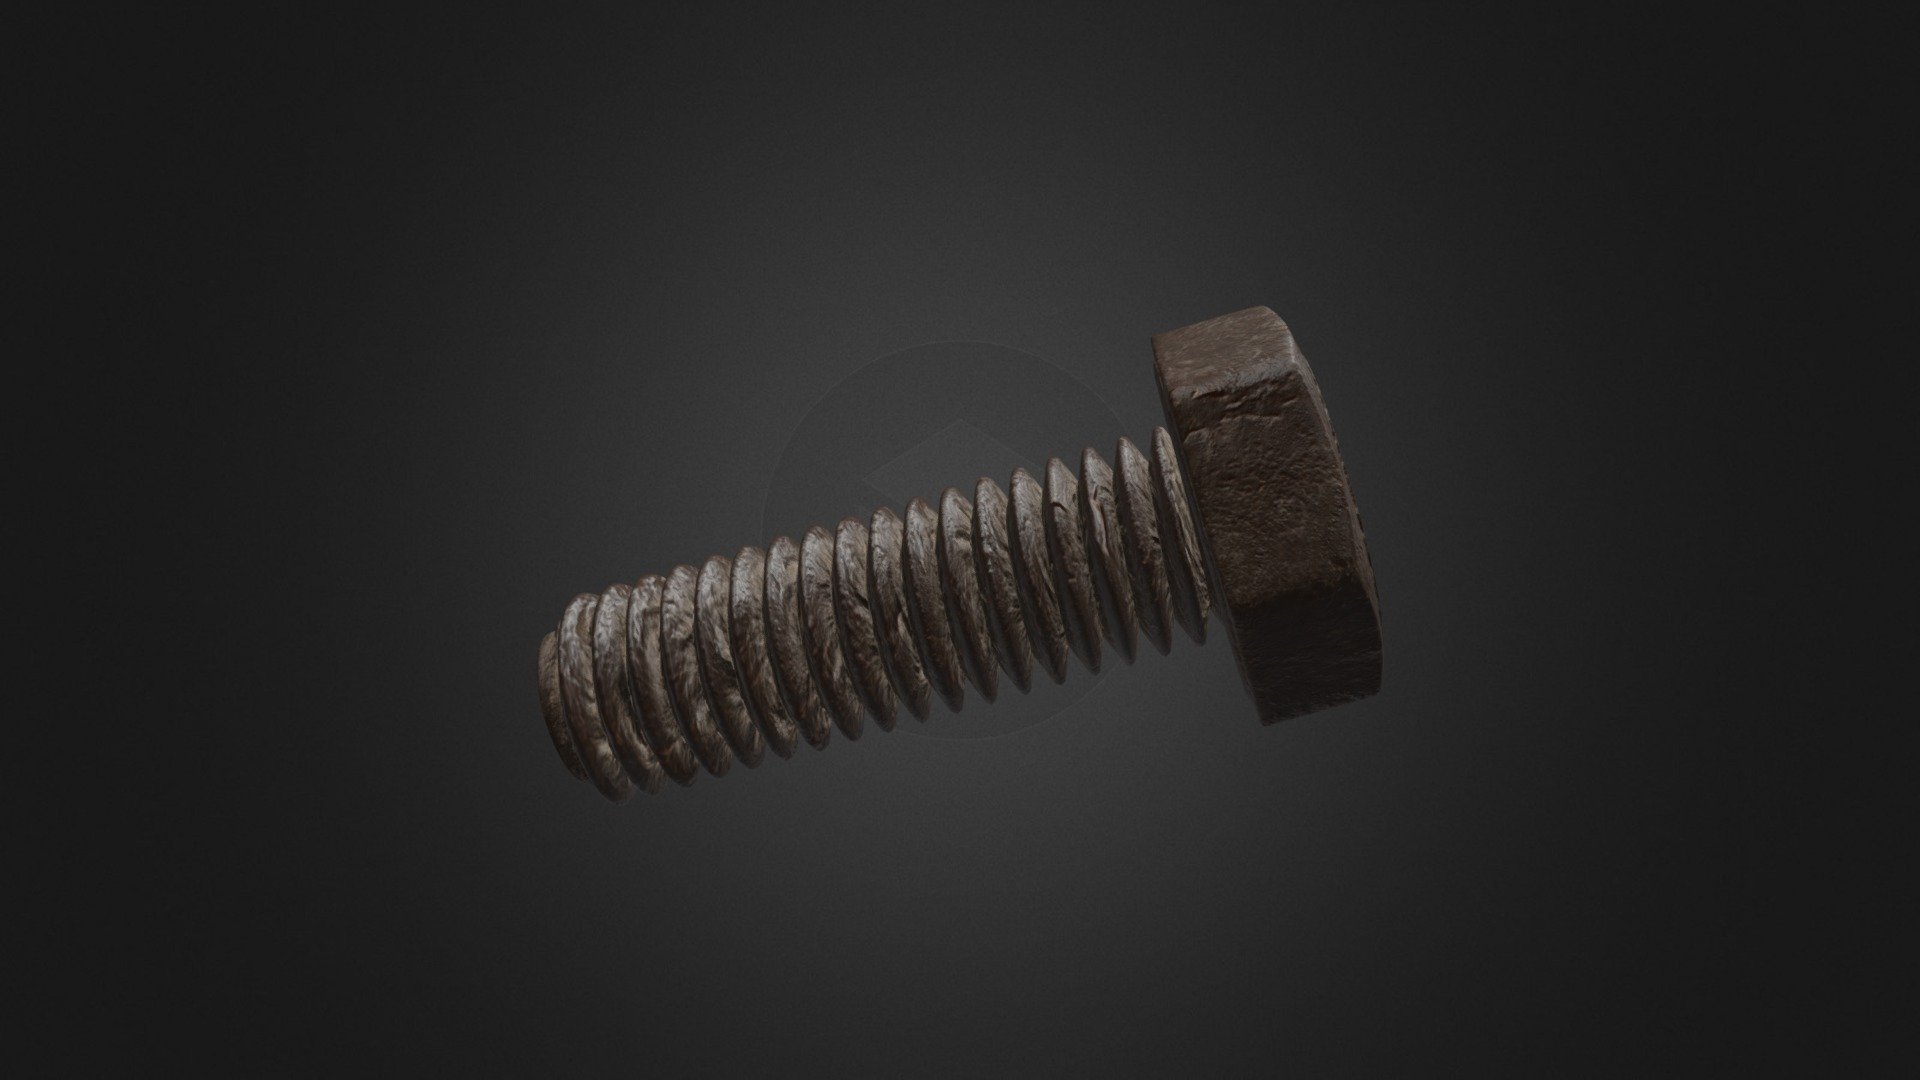 Modelled in Blender 2.74
Texturing in Substance Painter - Bolt - 3D model by themaxirule 3d model